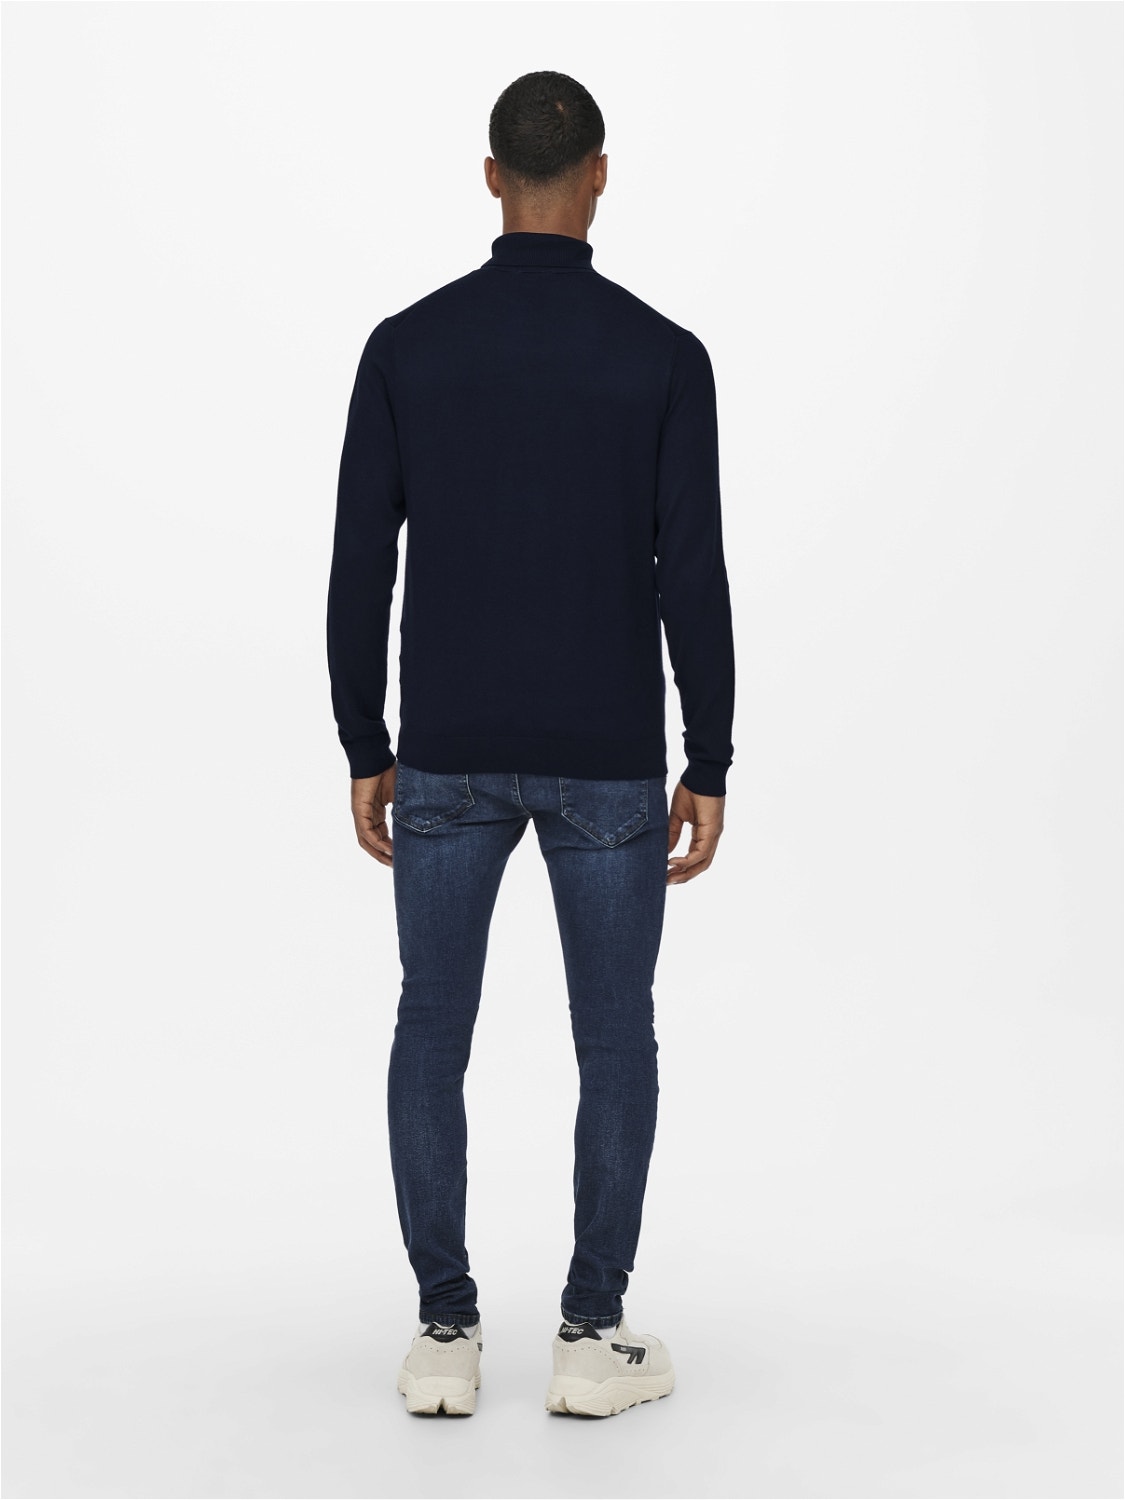 ONLY & SONS Polokrage Pullover -Dark Navy - 22020879